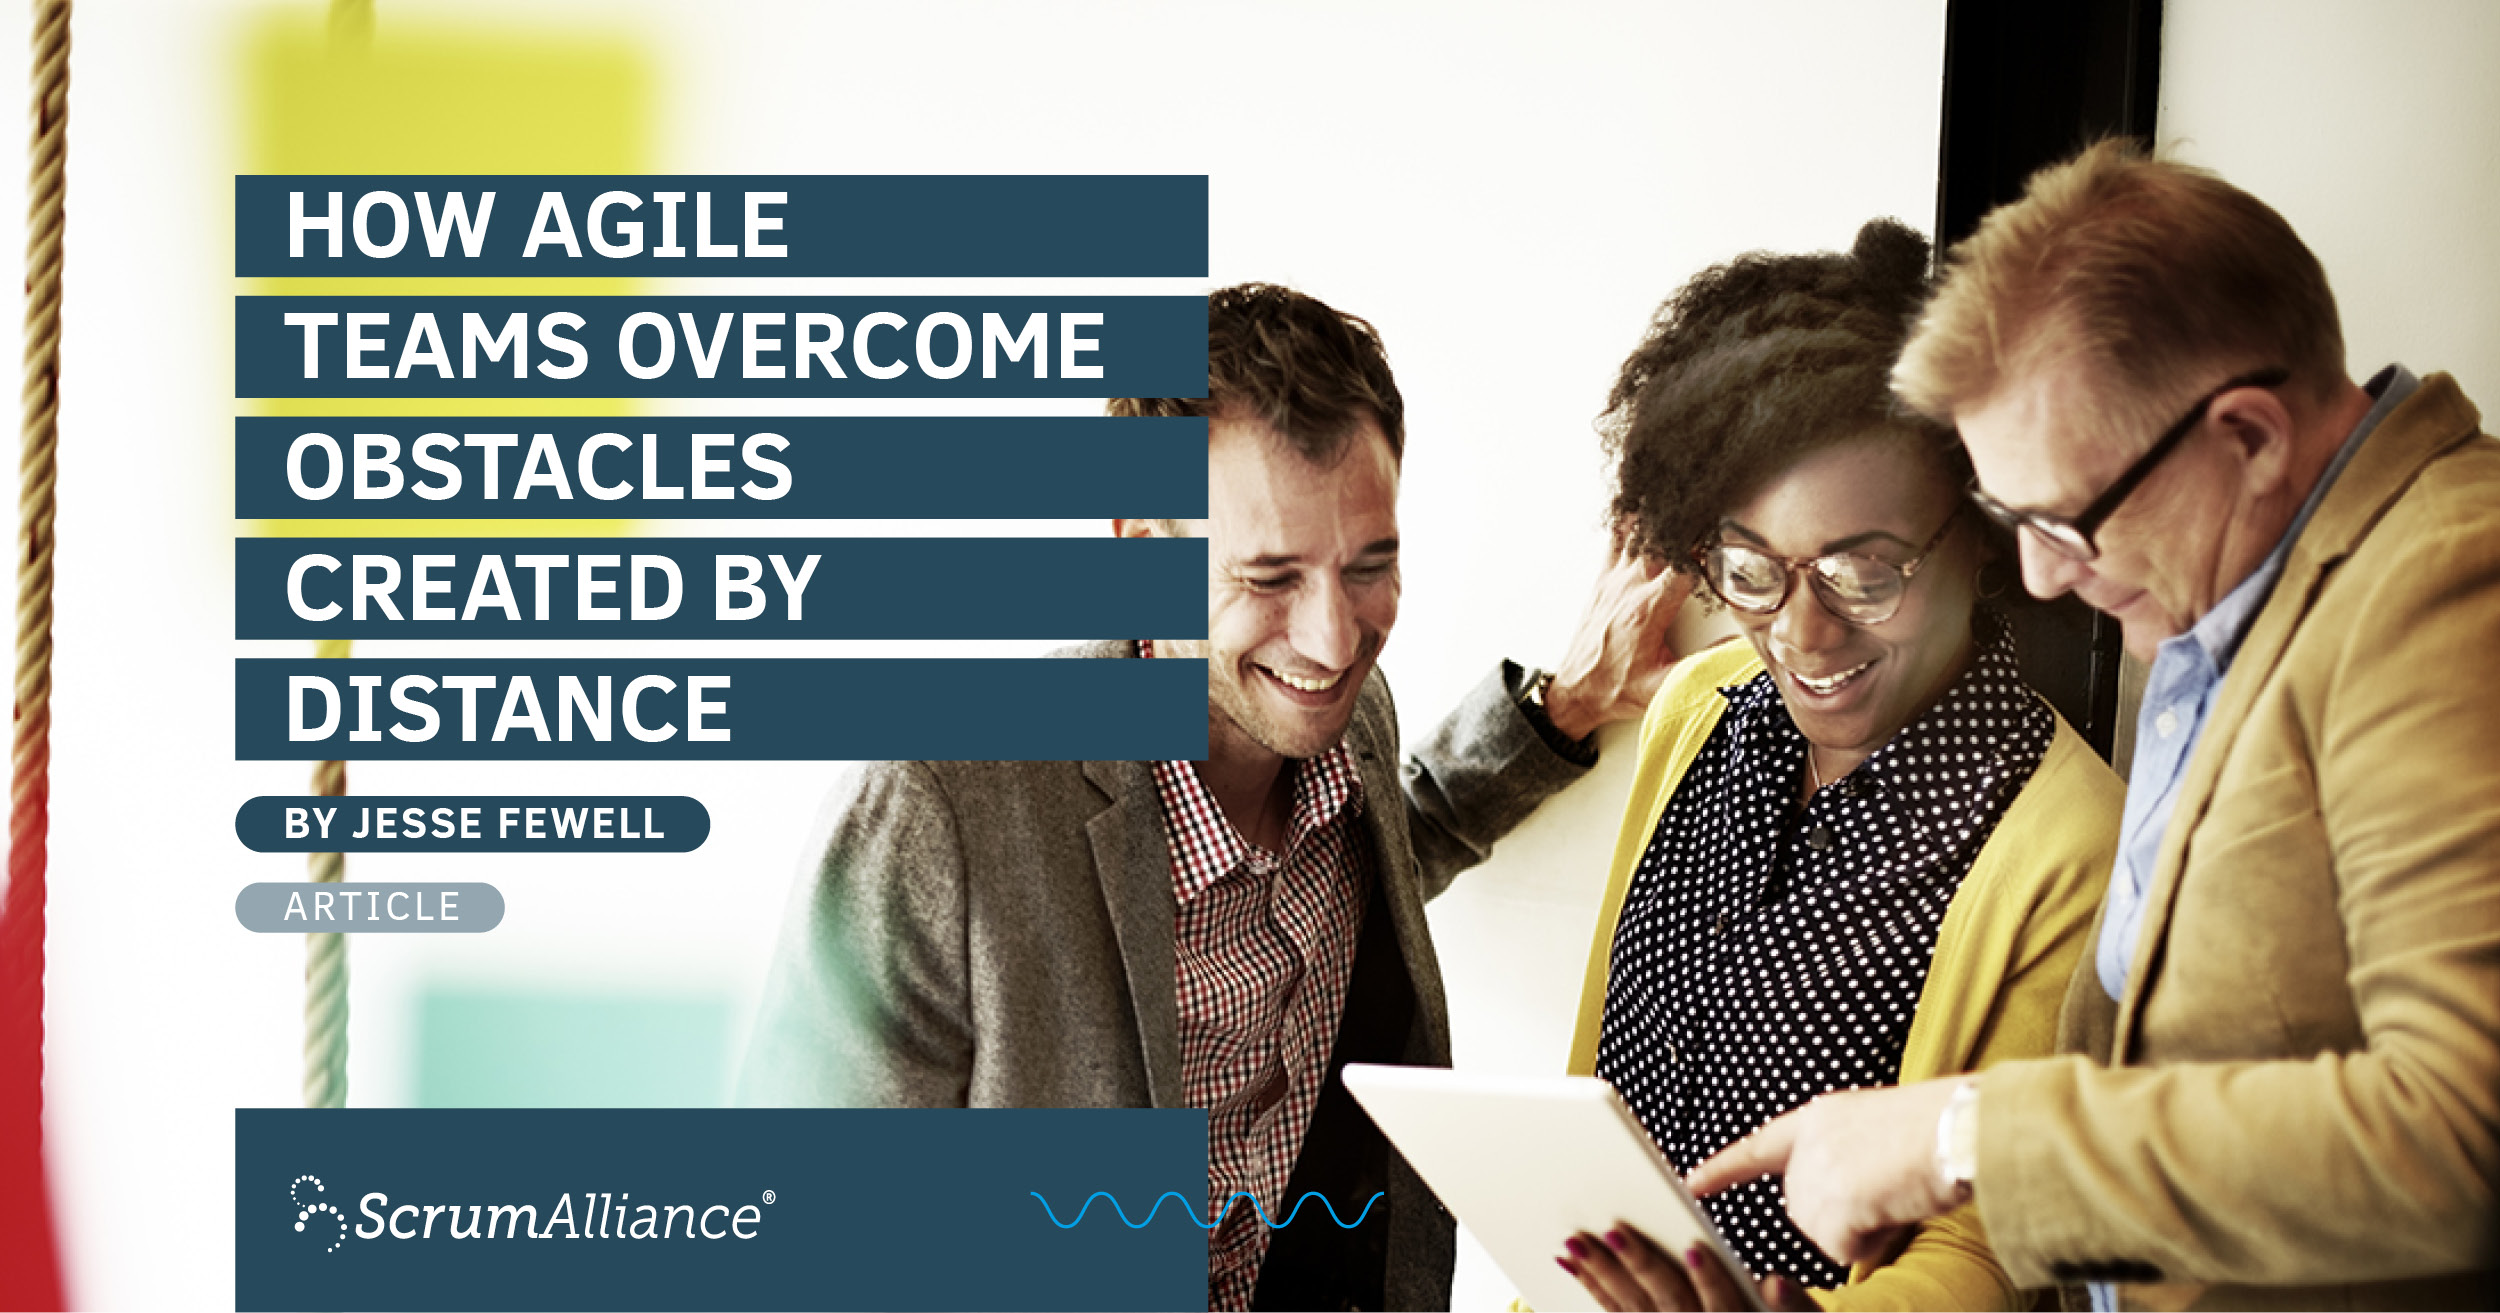 Article - How Agile Teams Overcome Obstacles Created by Distance